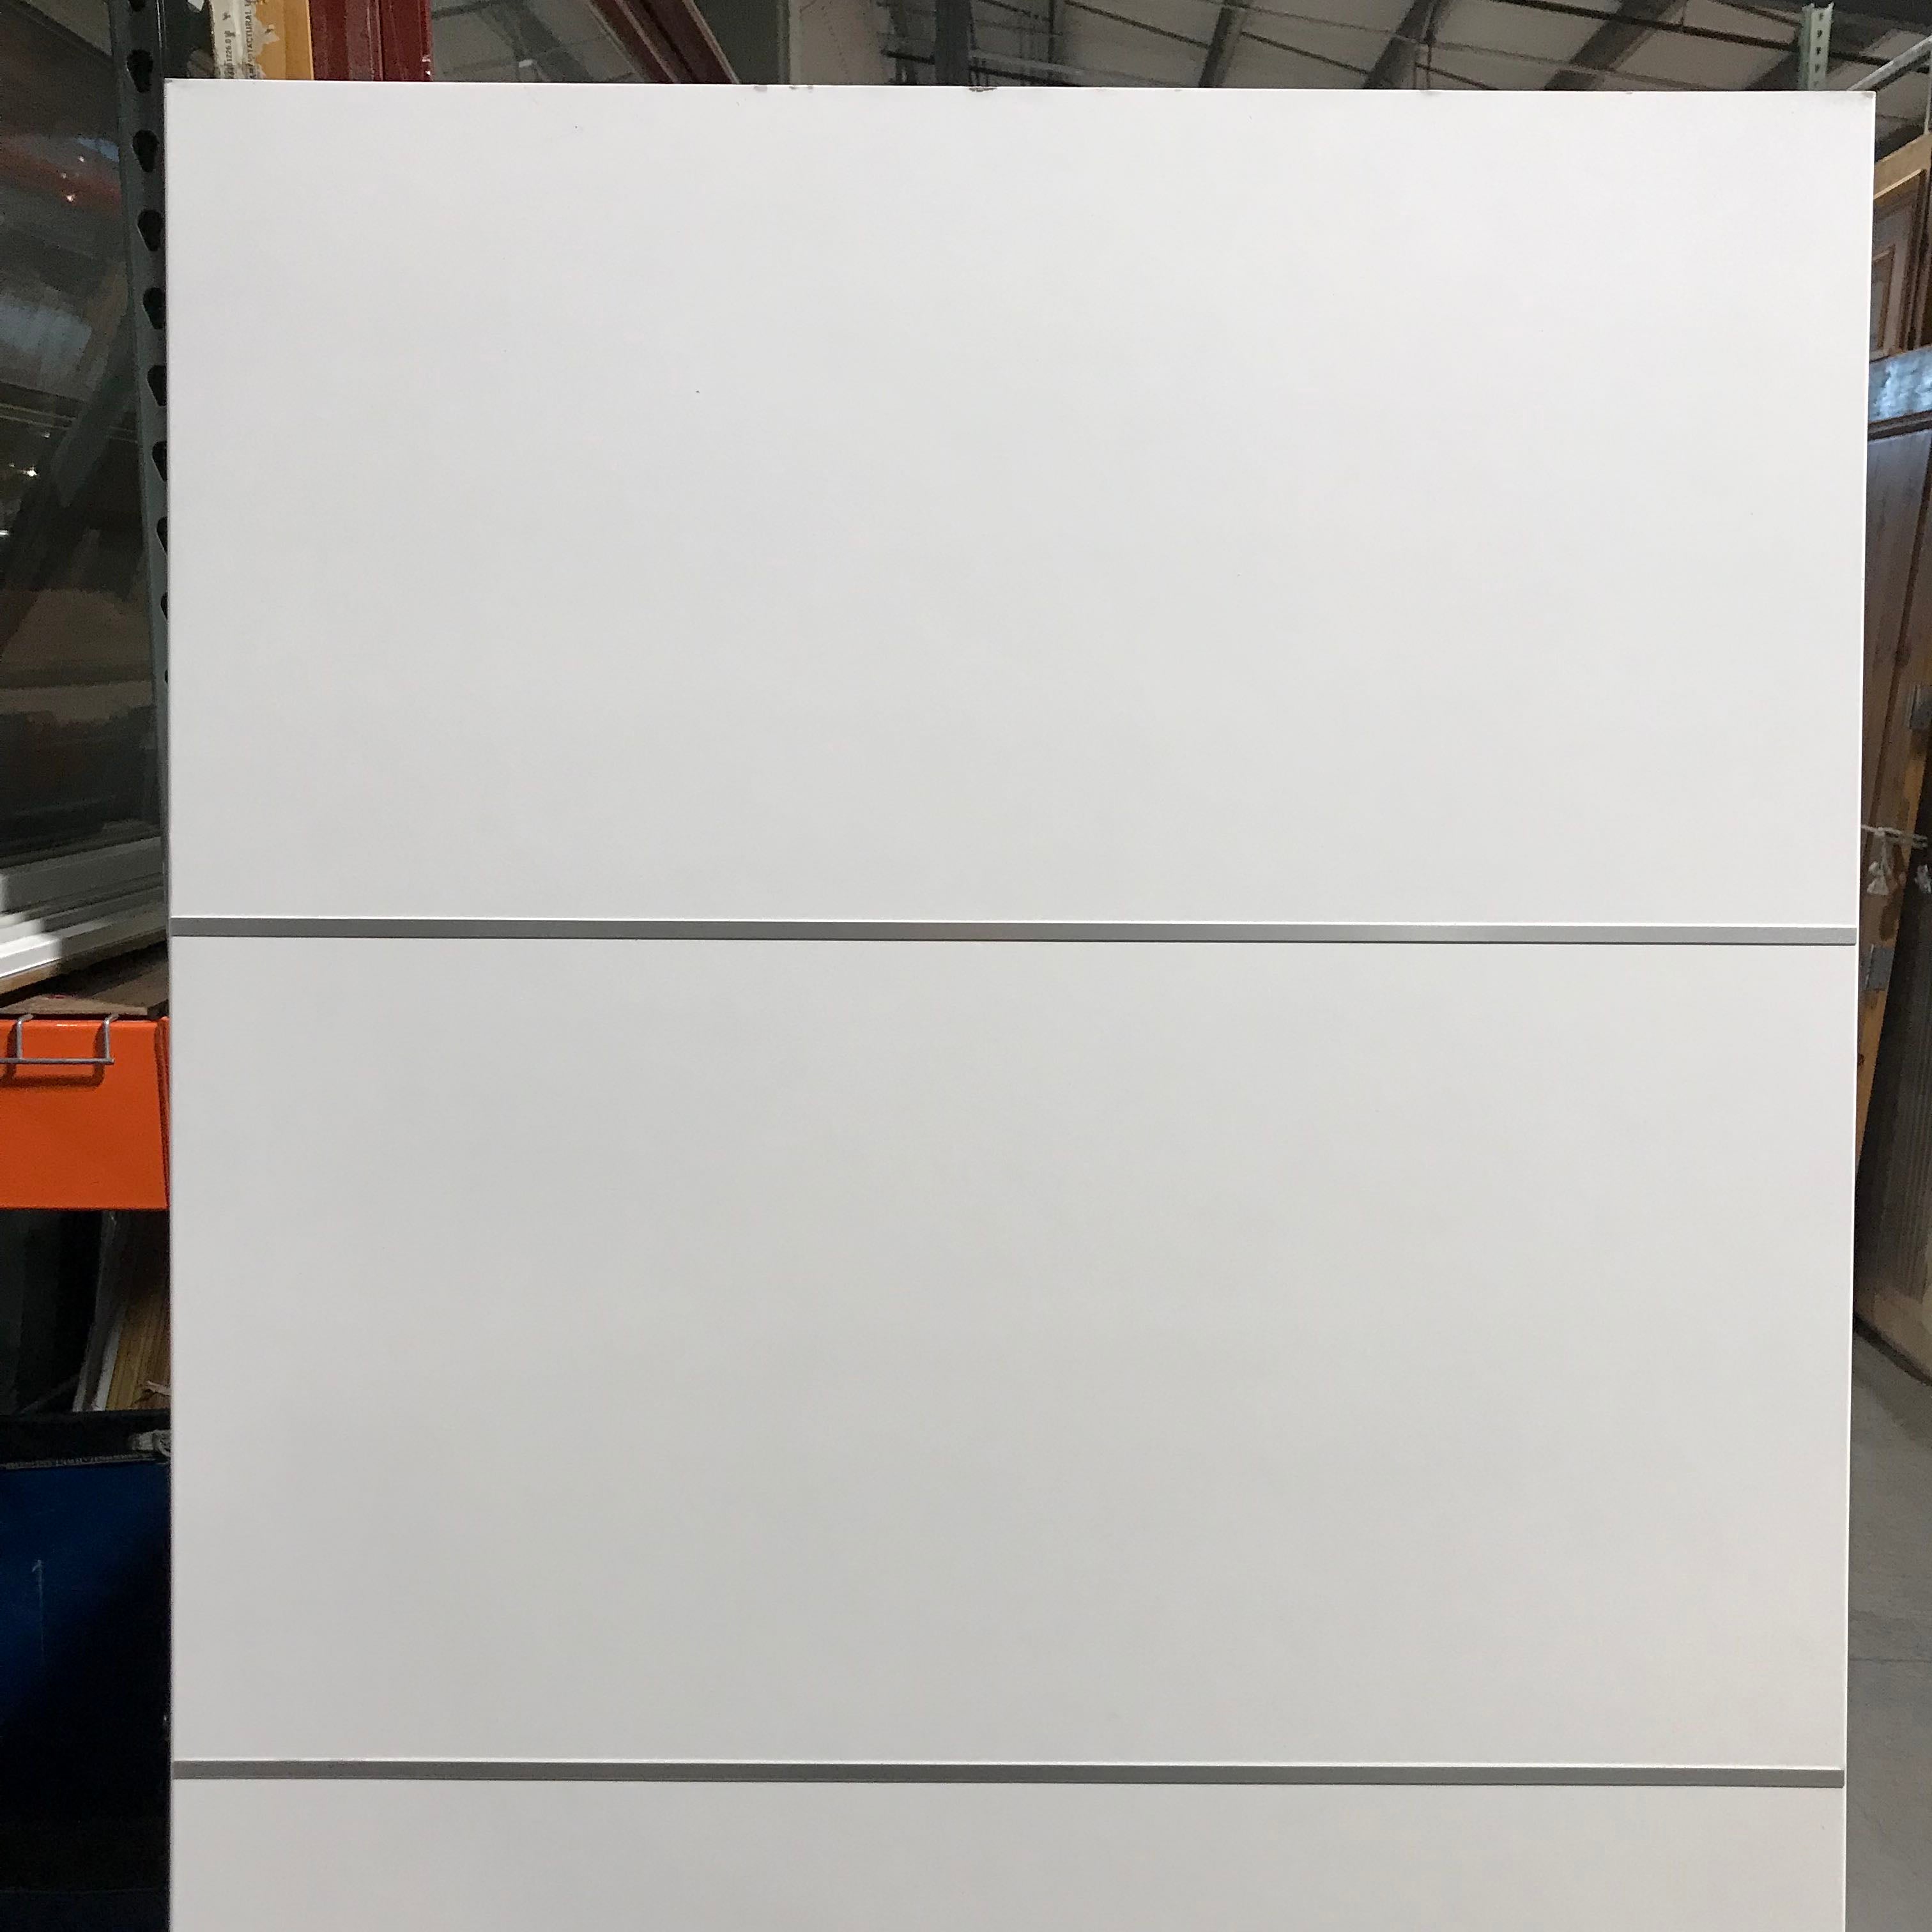 31.75"x 79.25"x 1.75" Painted White Melamine Solid Slab with Stainless Bands Interior Door